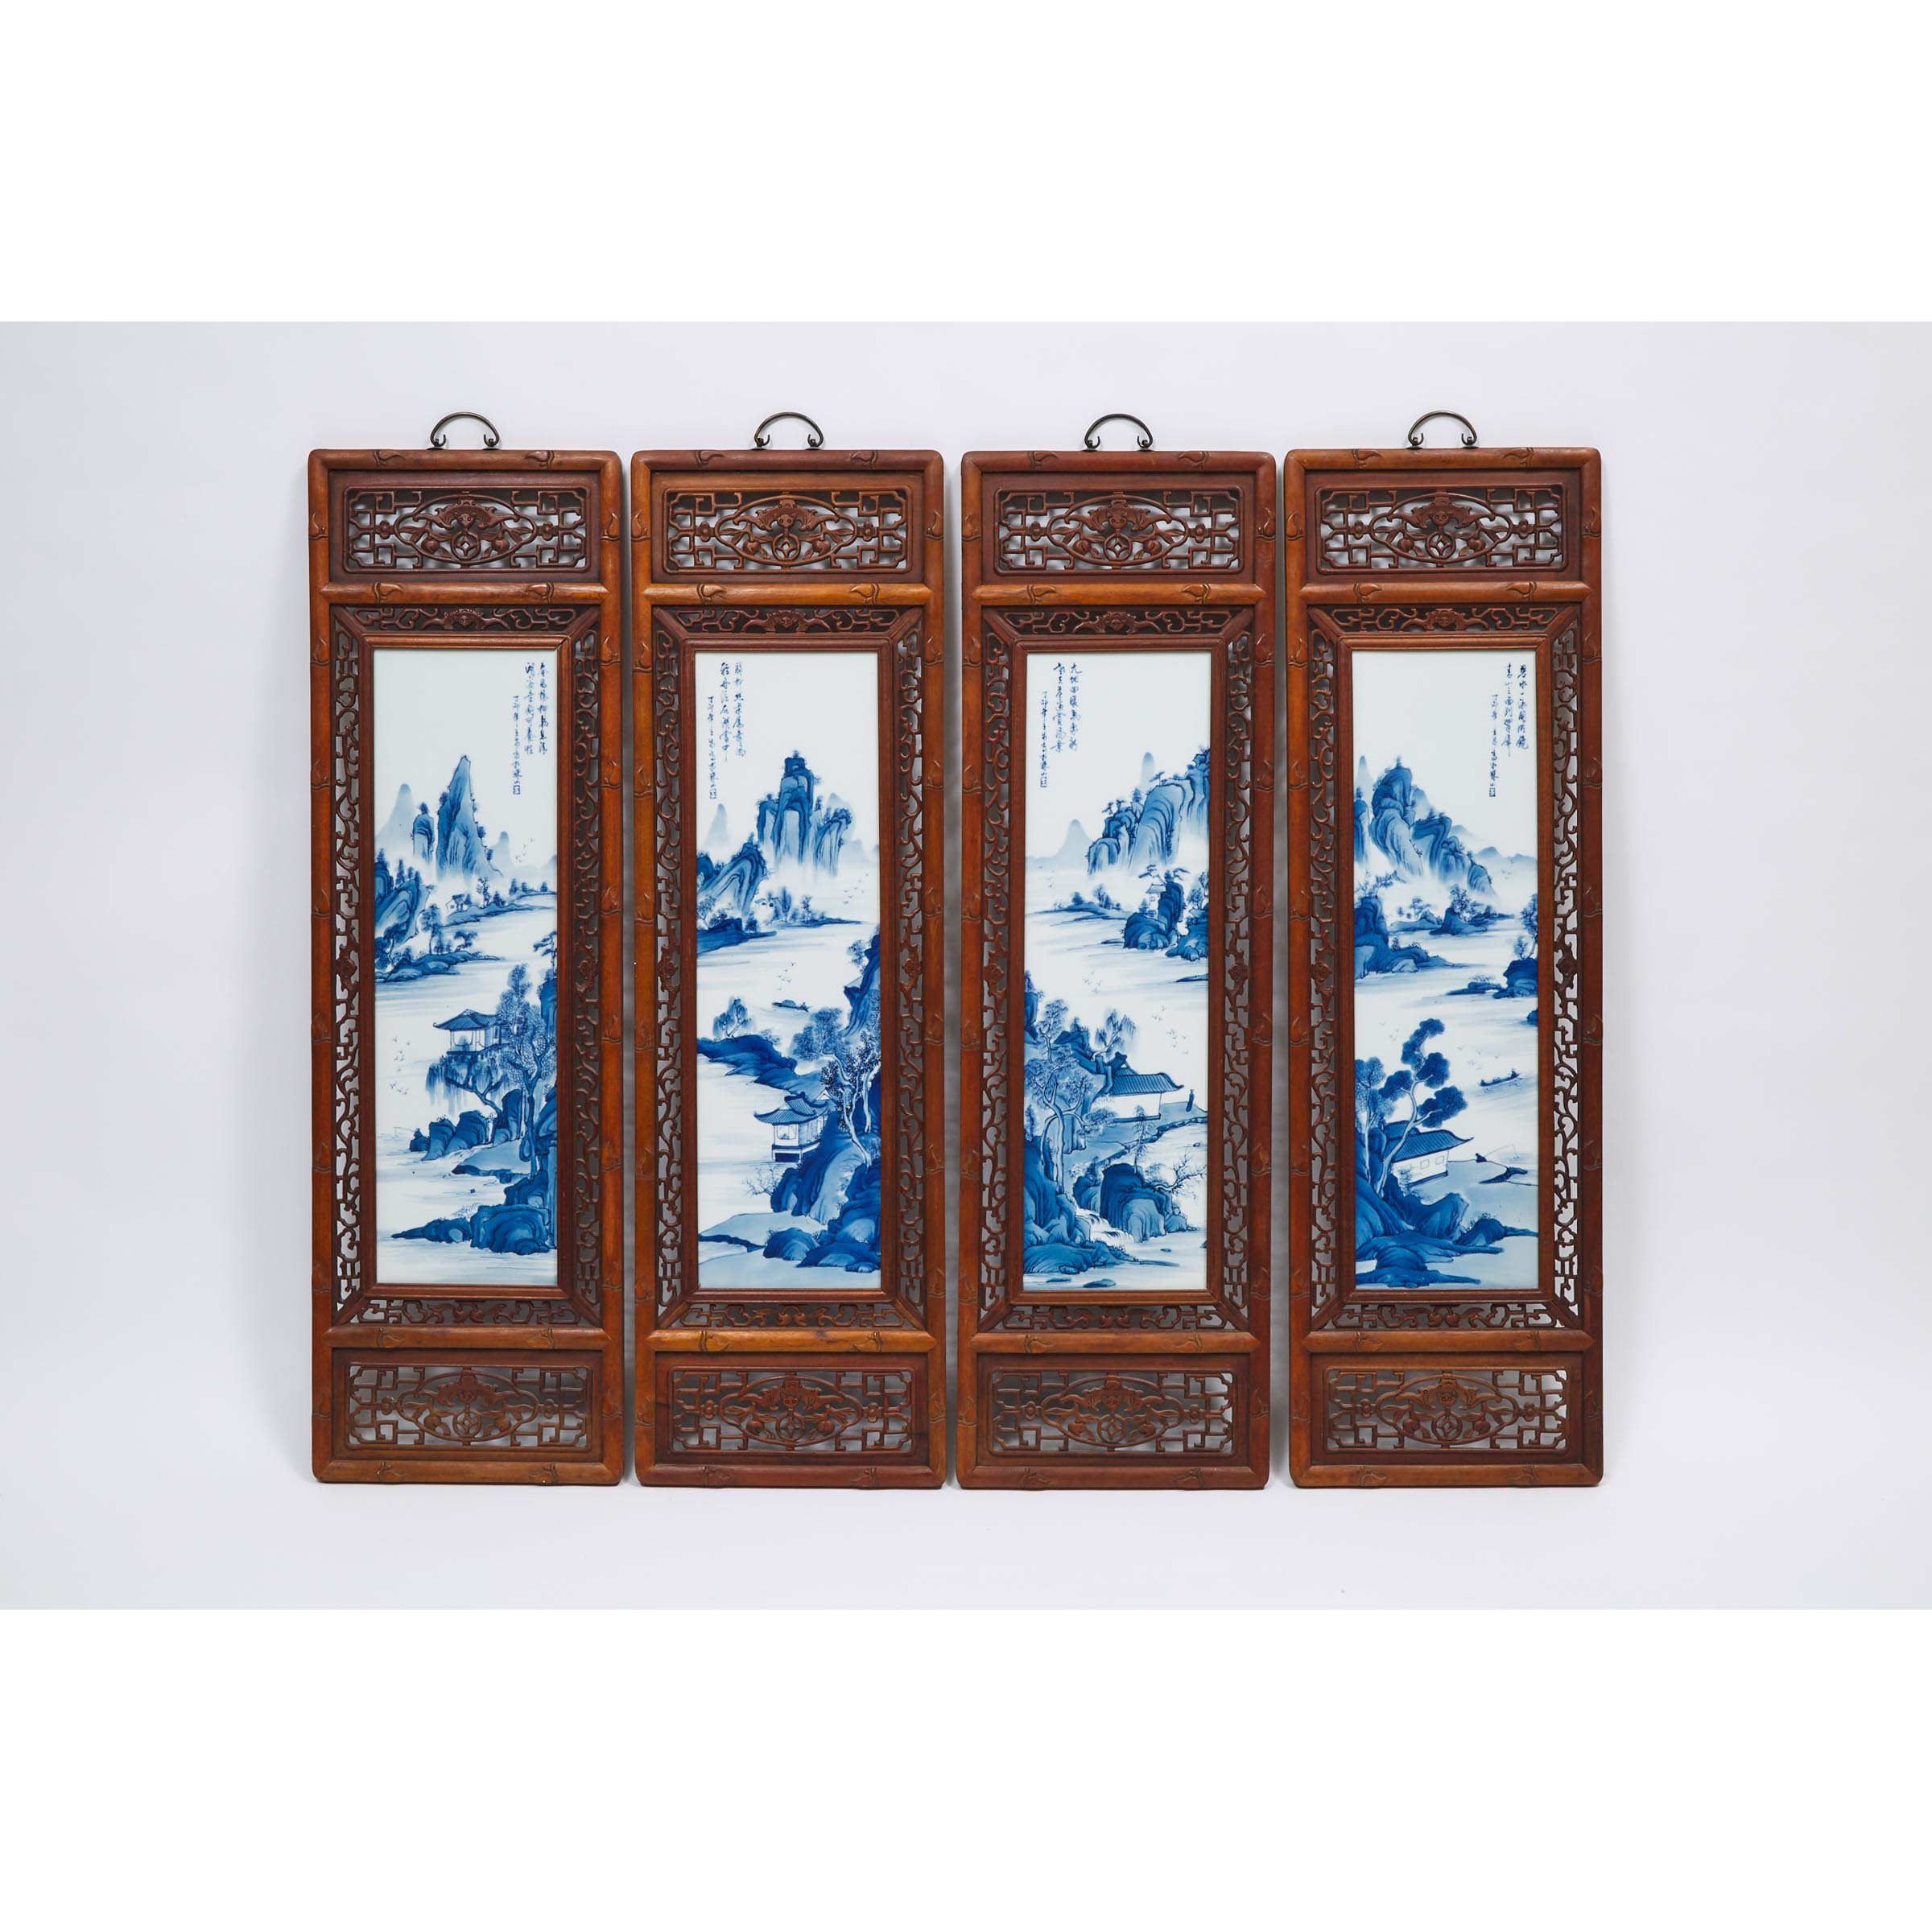 A Set of Four Blue and White Porcelain Inlaid Wood Panels